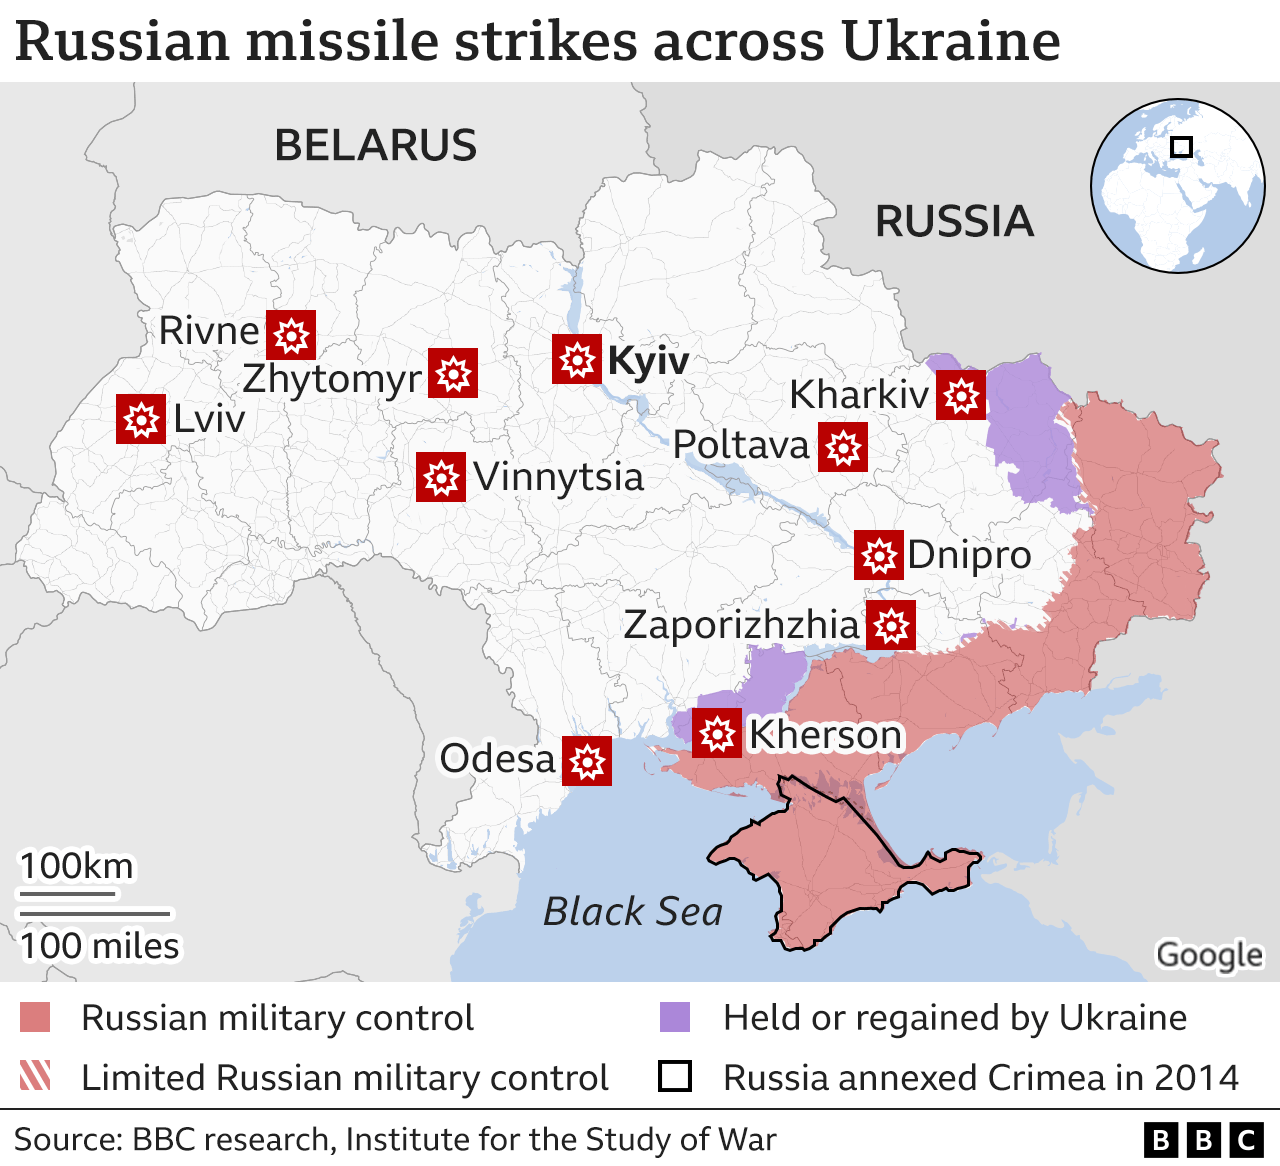 Russian showing Russian missile strikes in Ukraine. Targets including Kyiv, Kharkiv, Lviv and Odesa.